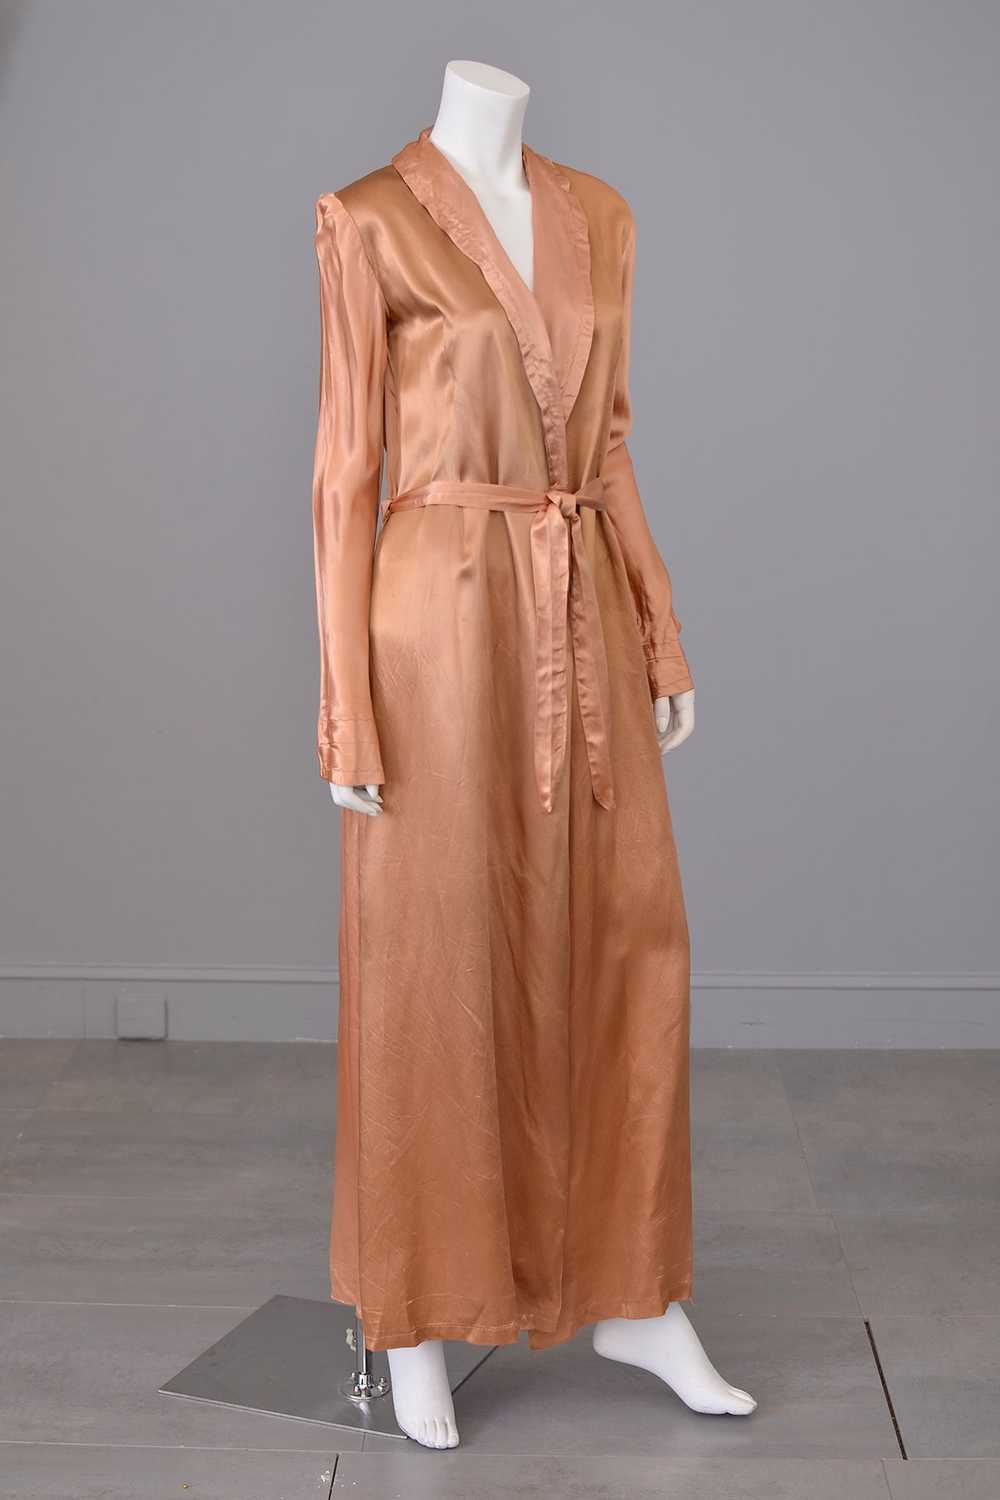 1940s Copper Satin Lounging Robe - image 1